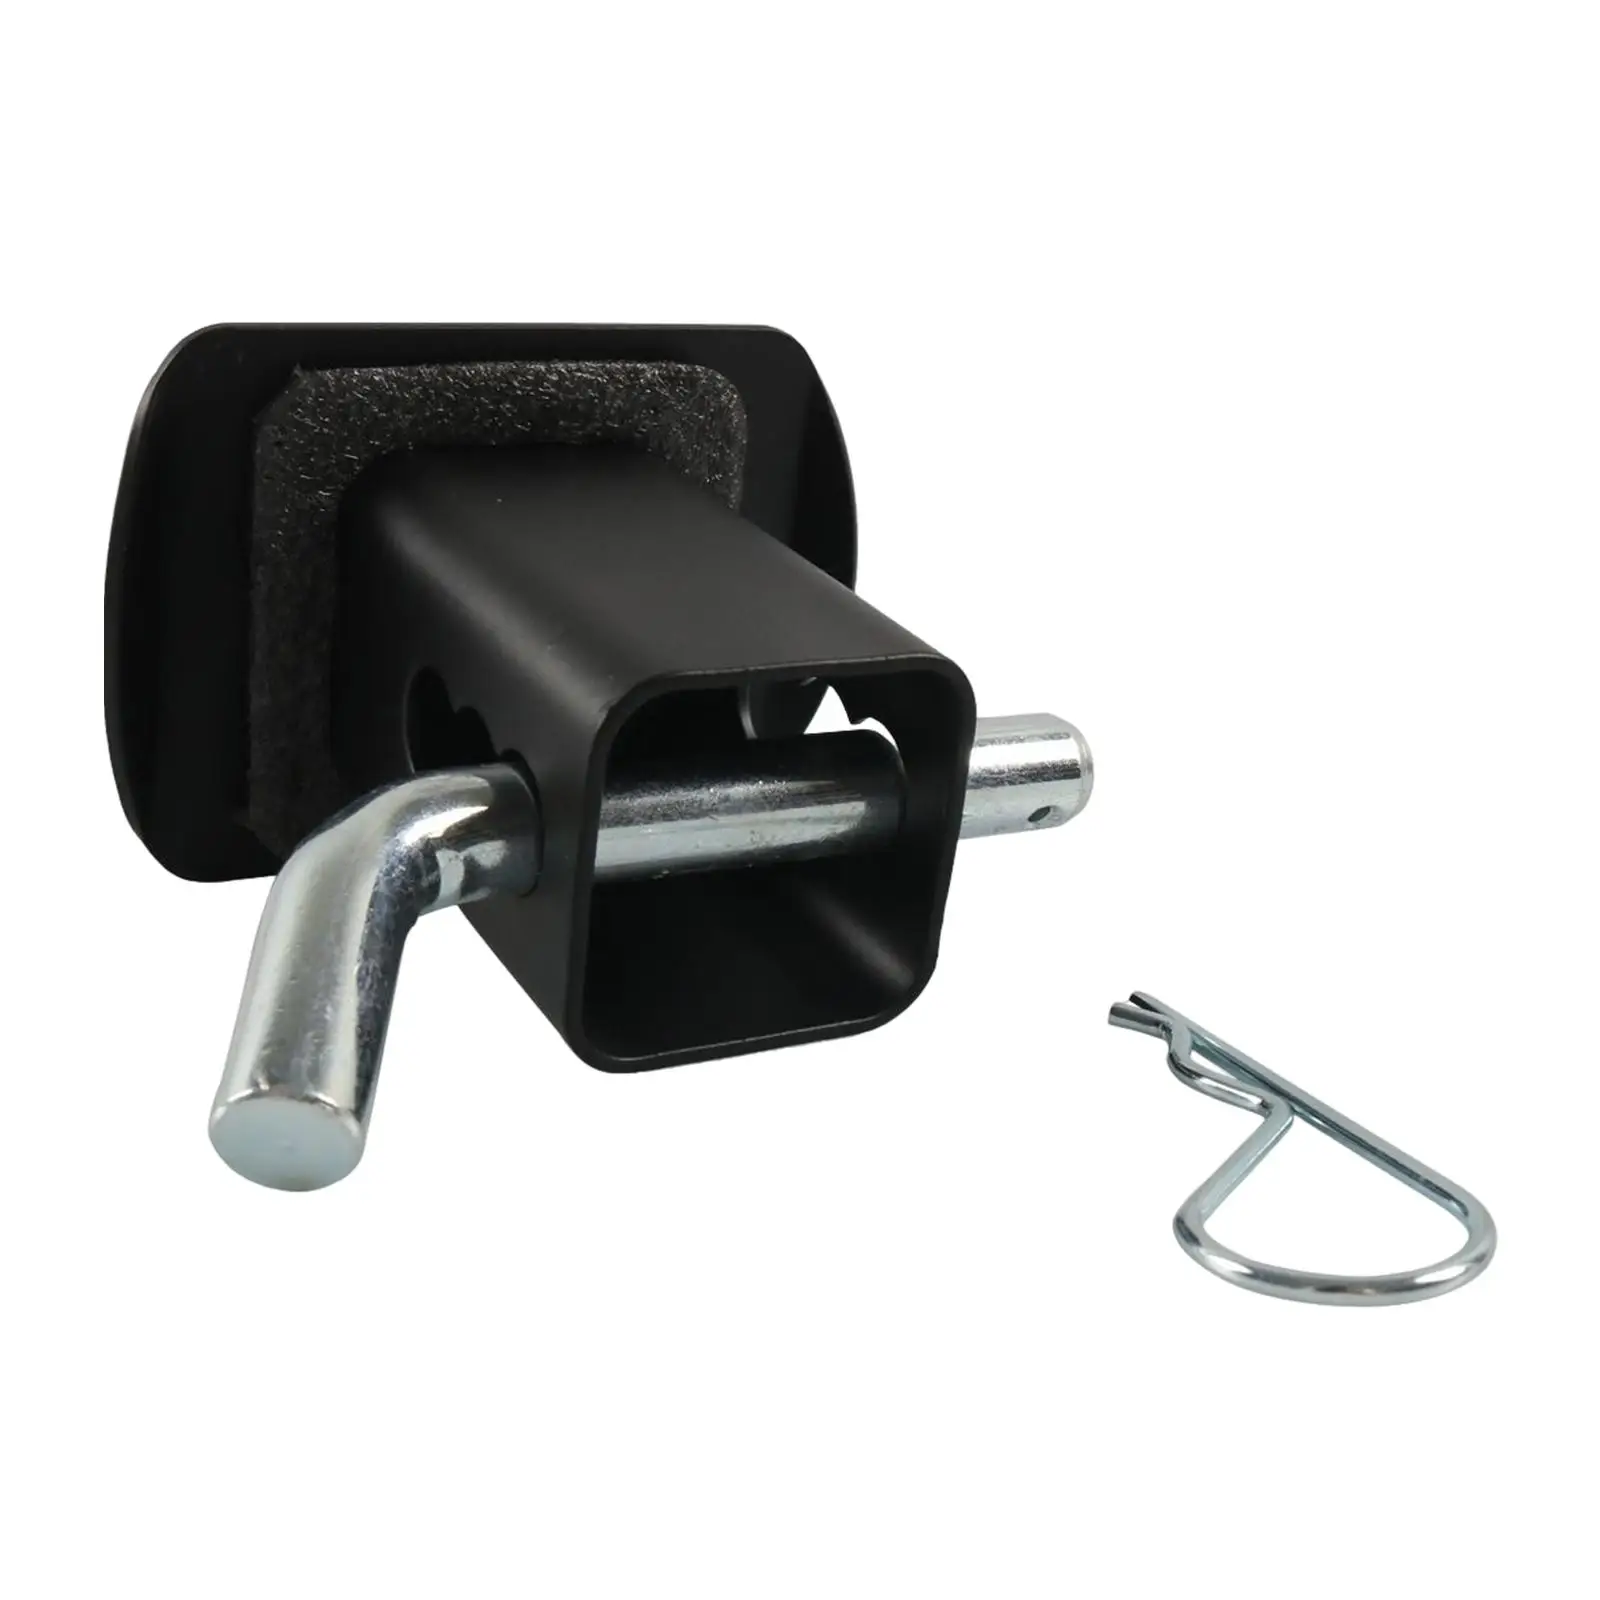 Tow Trailer Hitch cover for Automobile Accessory Direct Replaces